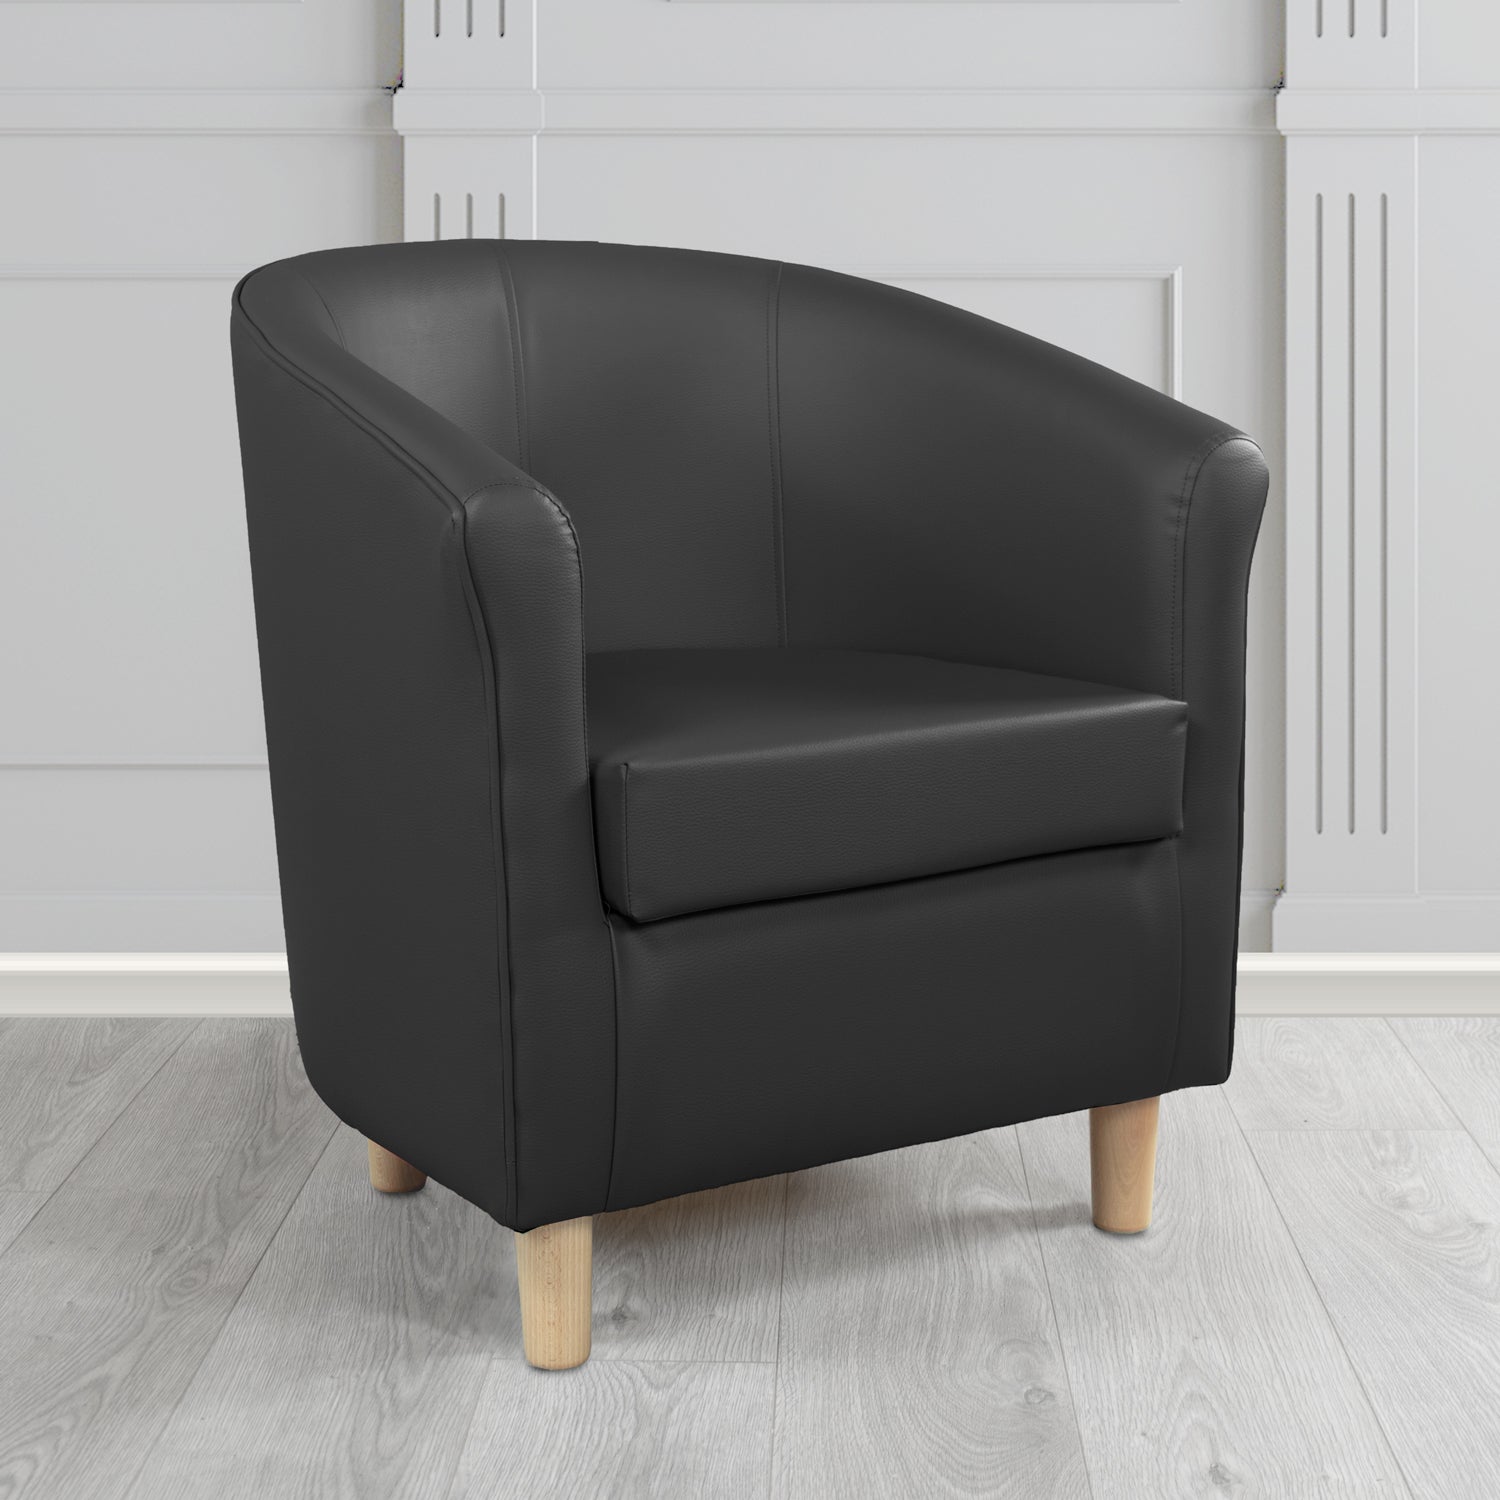 Tuscany Tub Chair in Madrid Black Faux Leather - The Tub Chair Shop